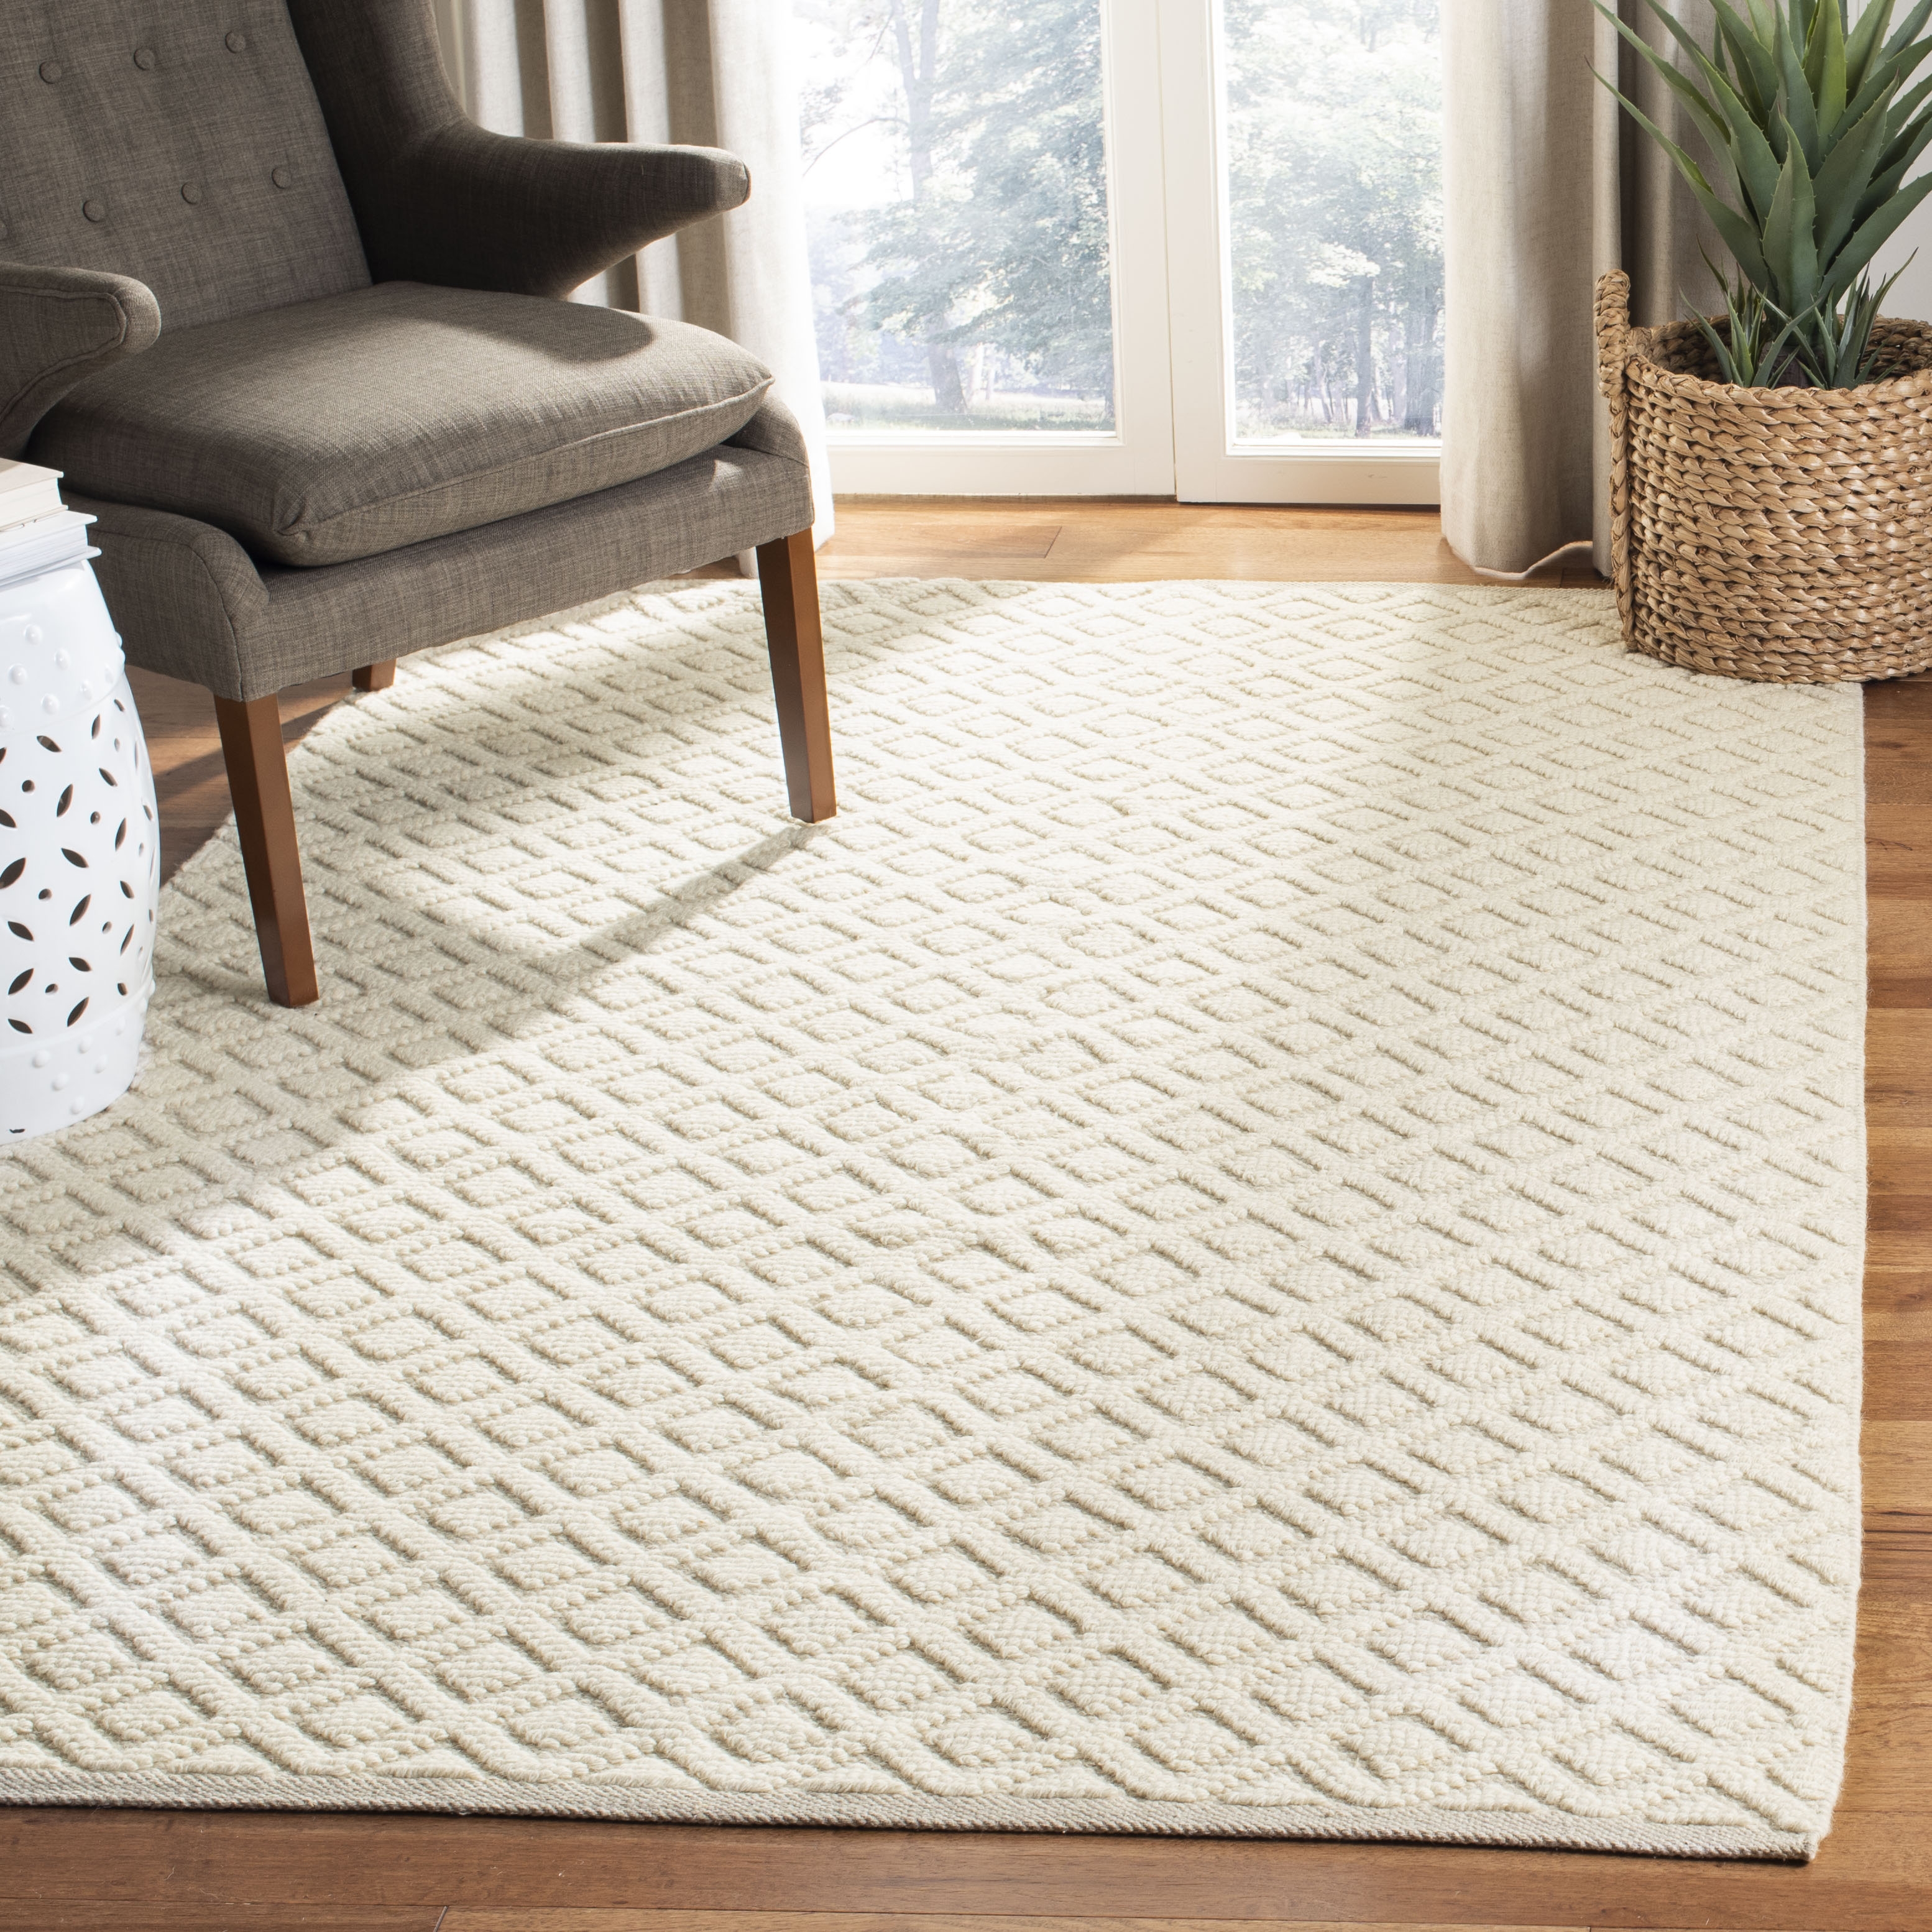 Arlo Home Hand Woven Area Rug, VRM304A, Ivory,  5' X 8' - Image 1